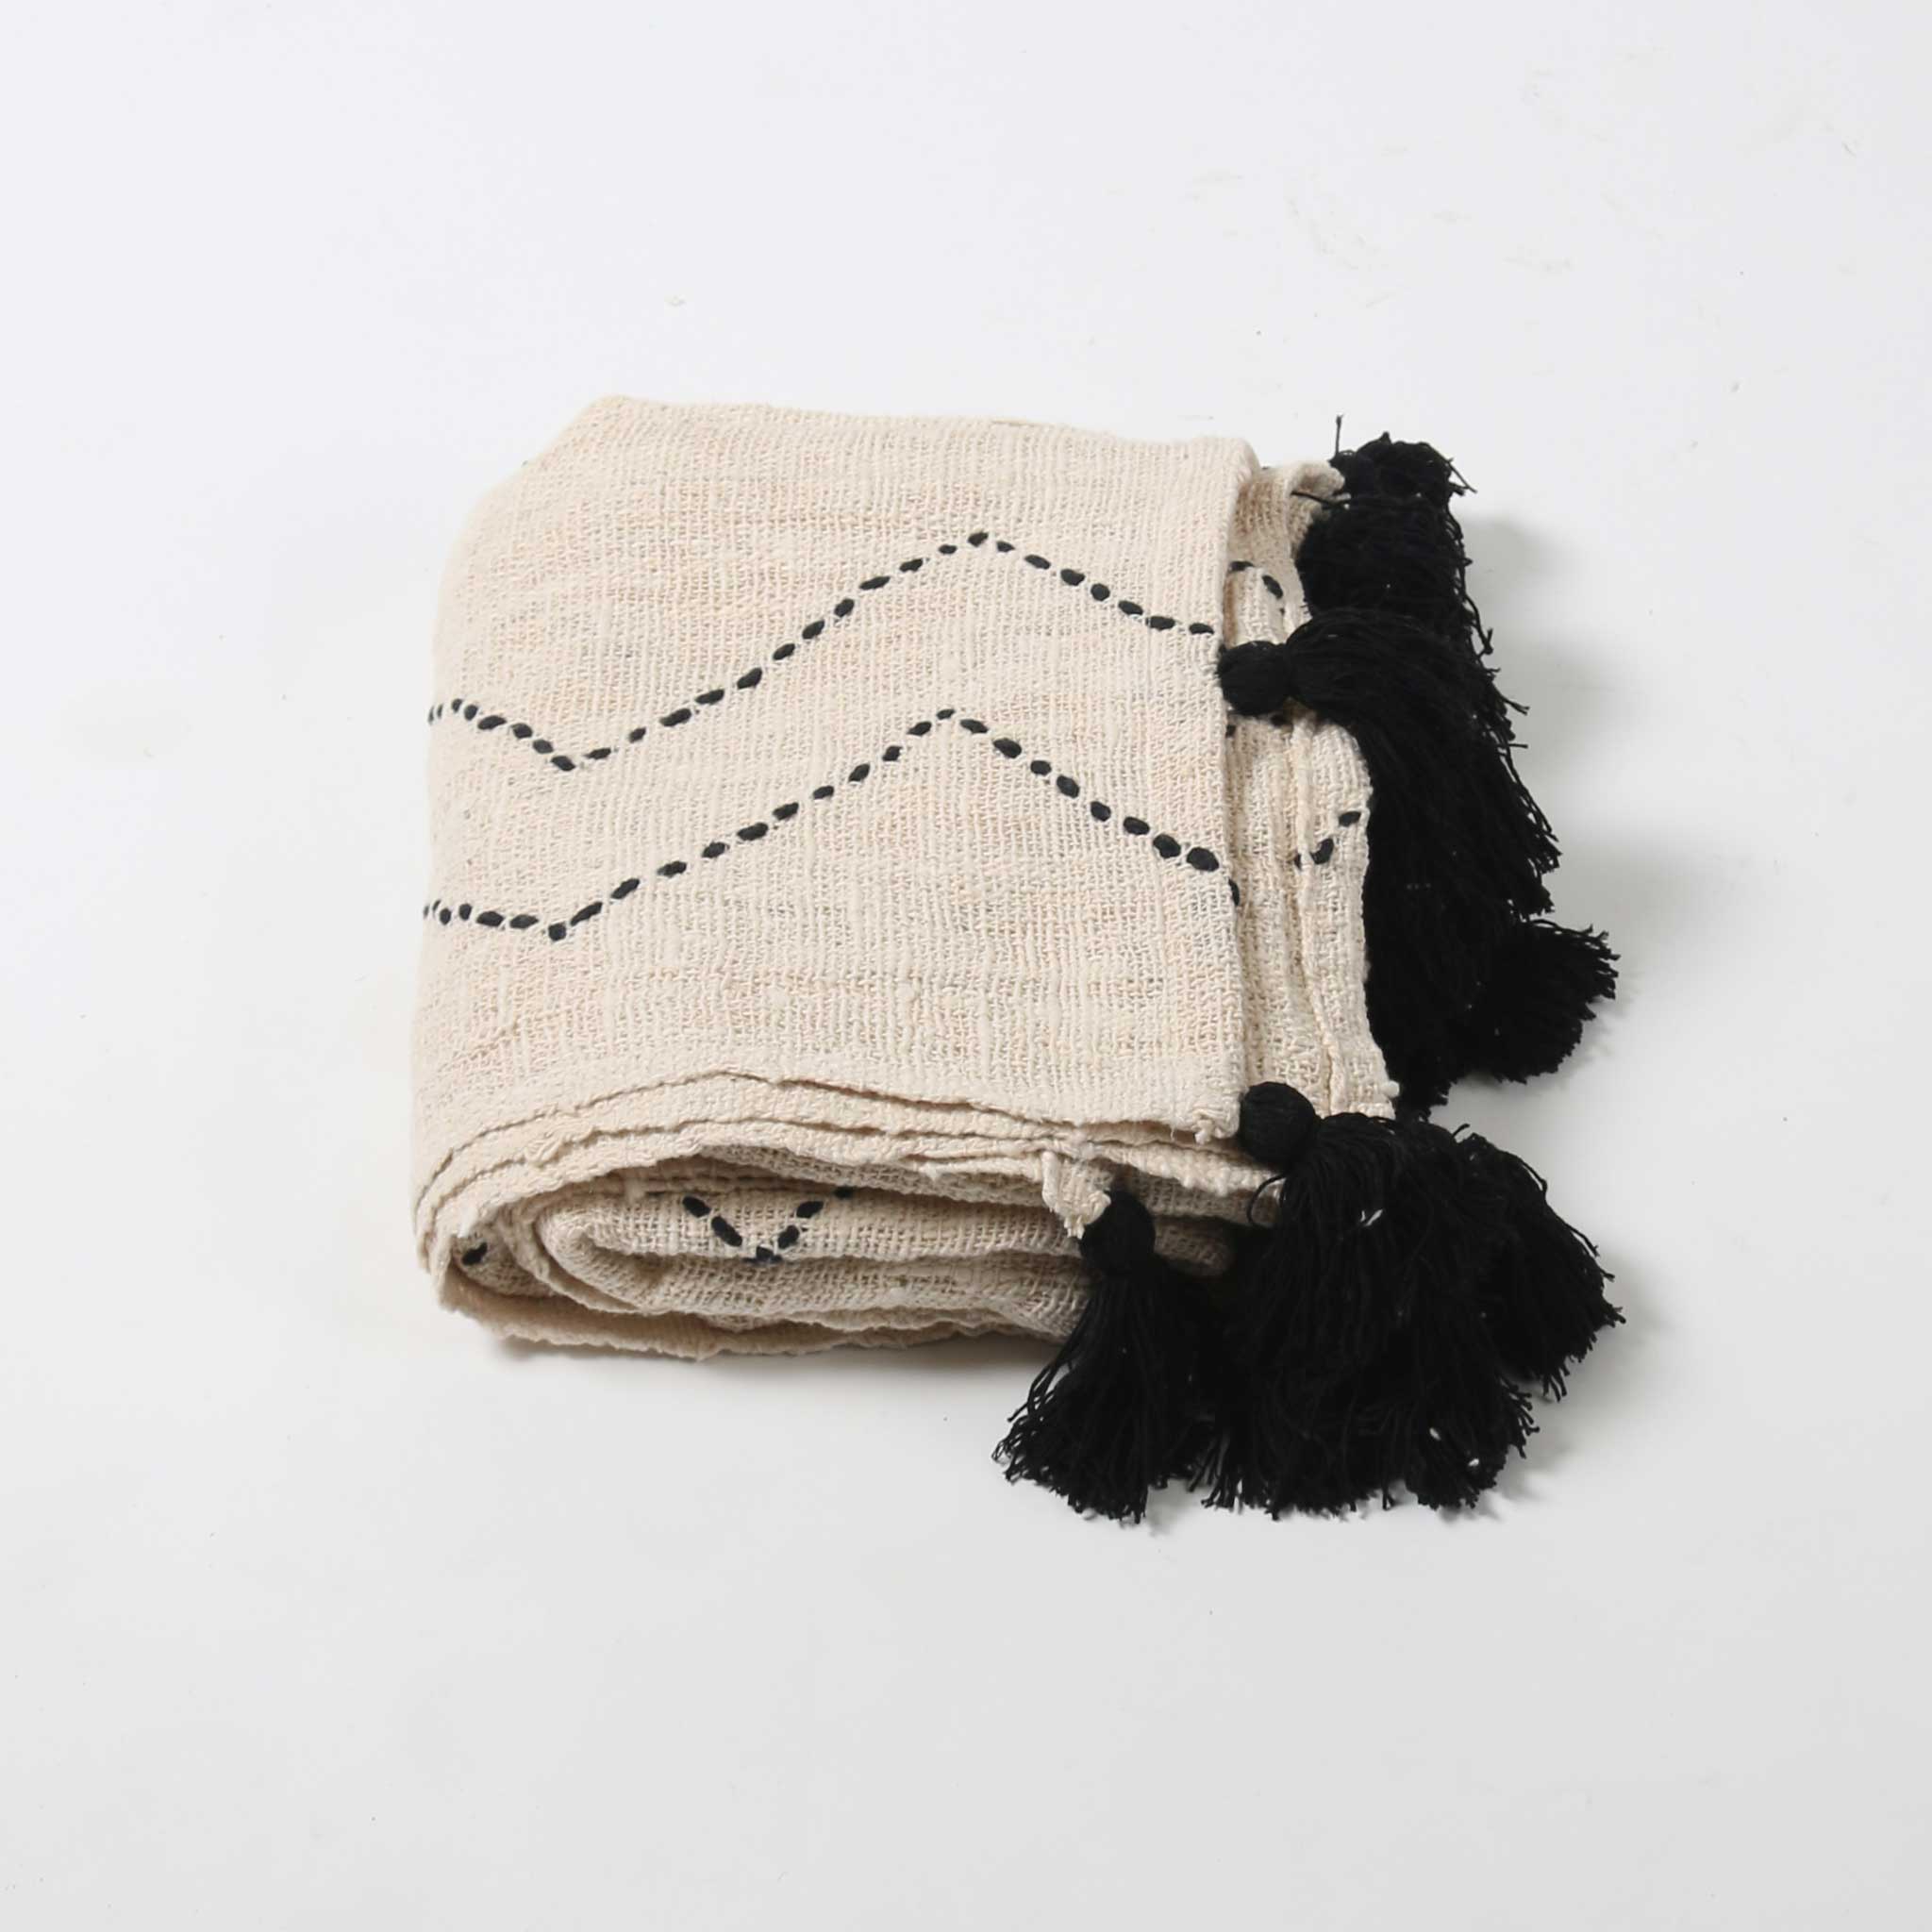 Cream Cotton Throw with Black Stitching and End Tassels